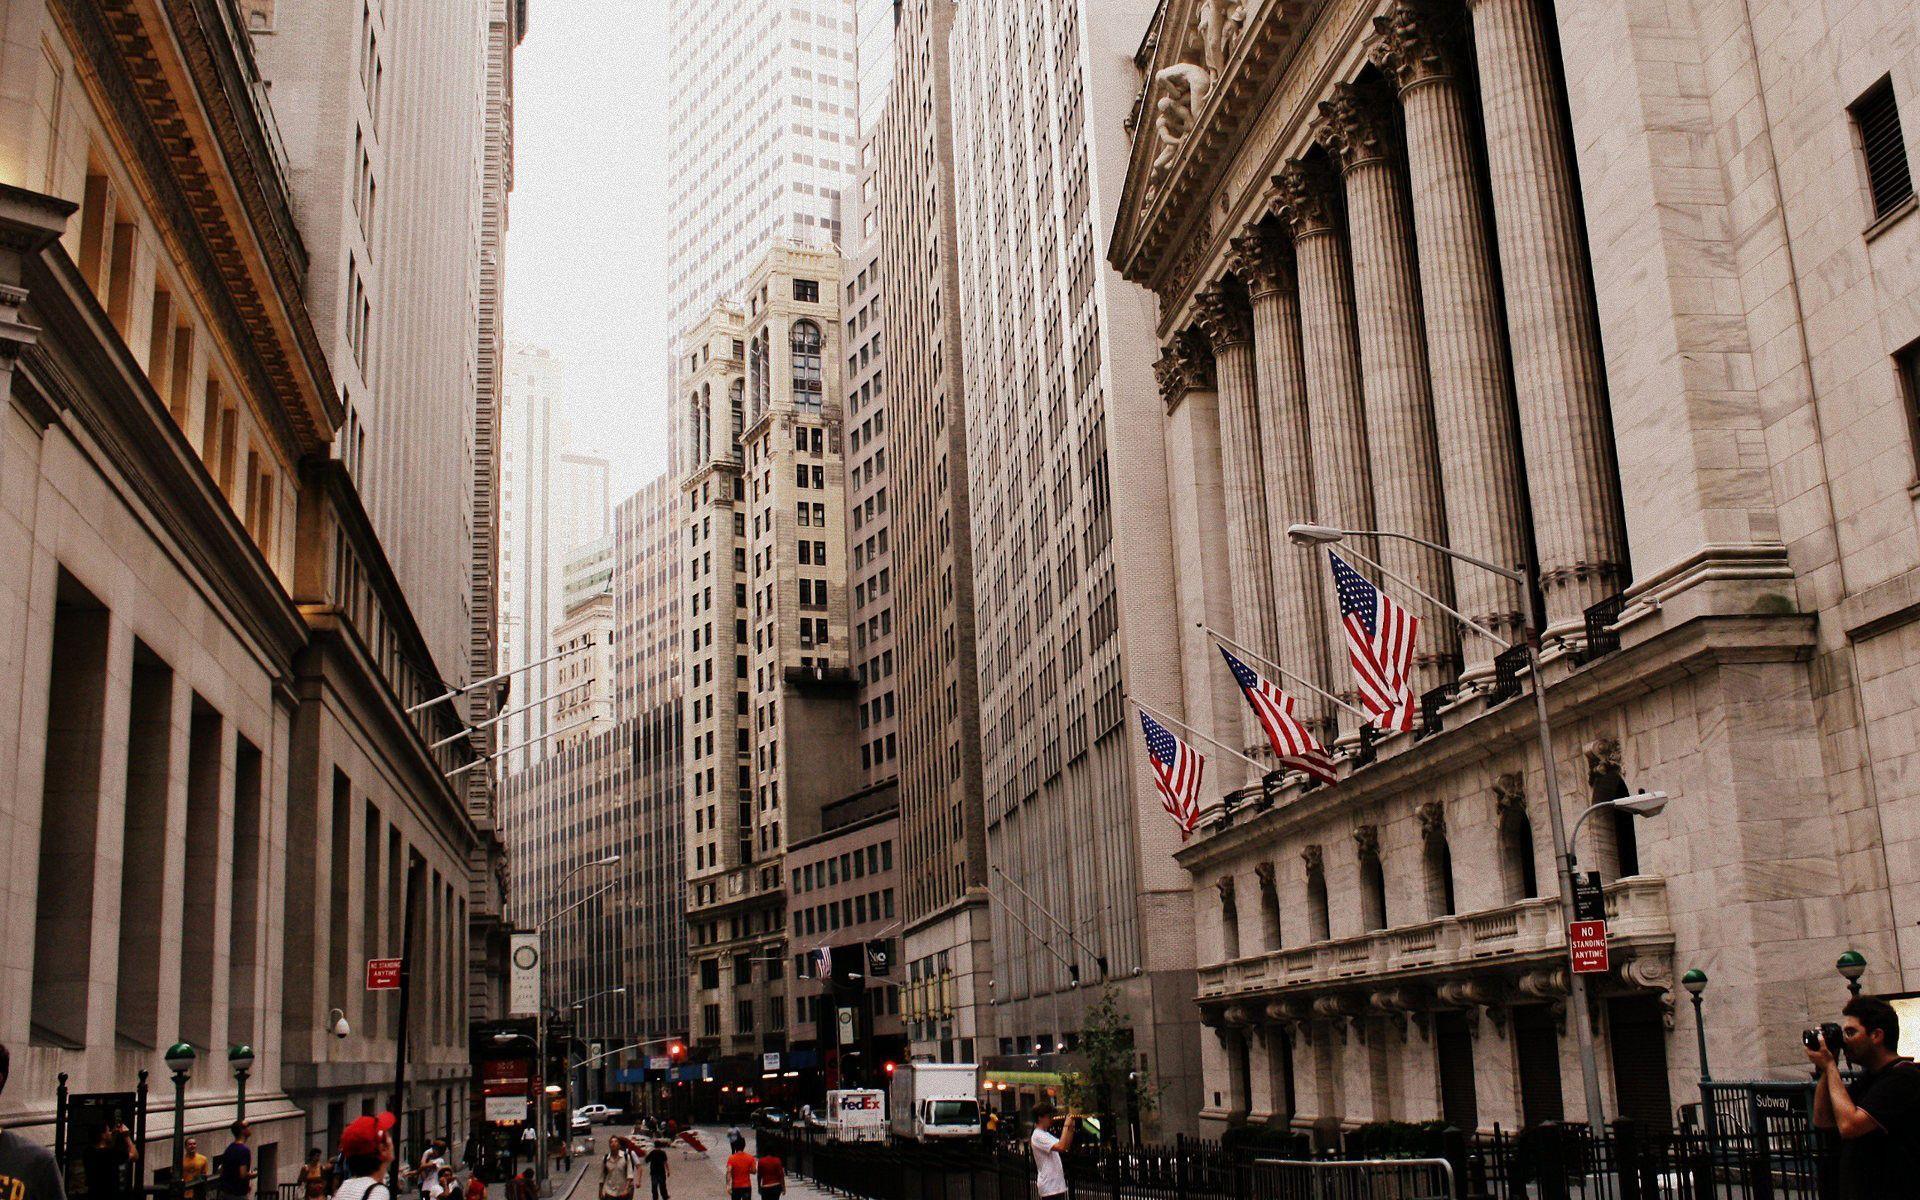 wall street background